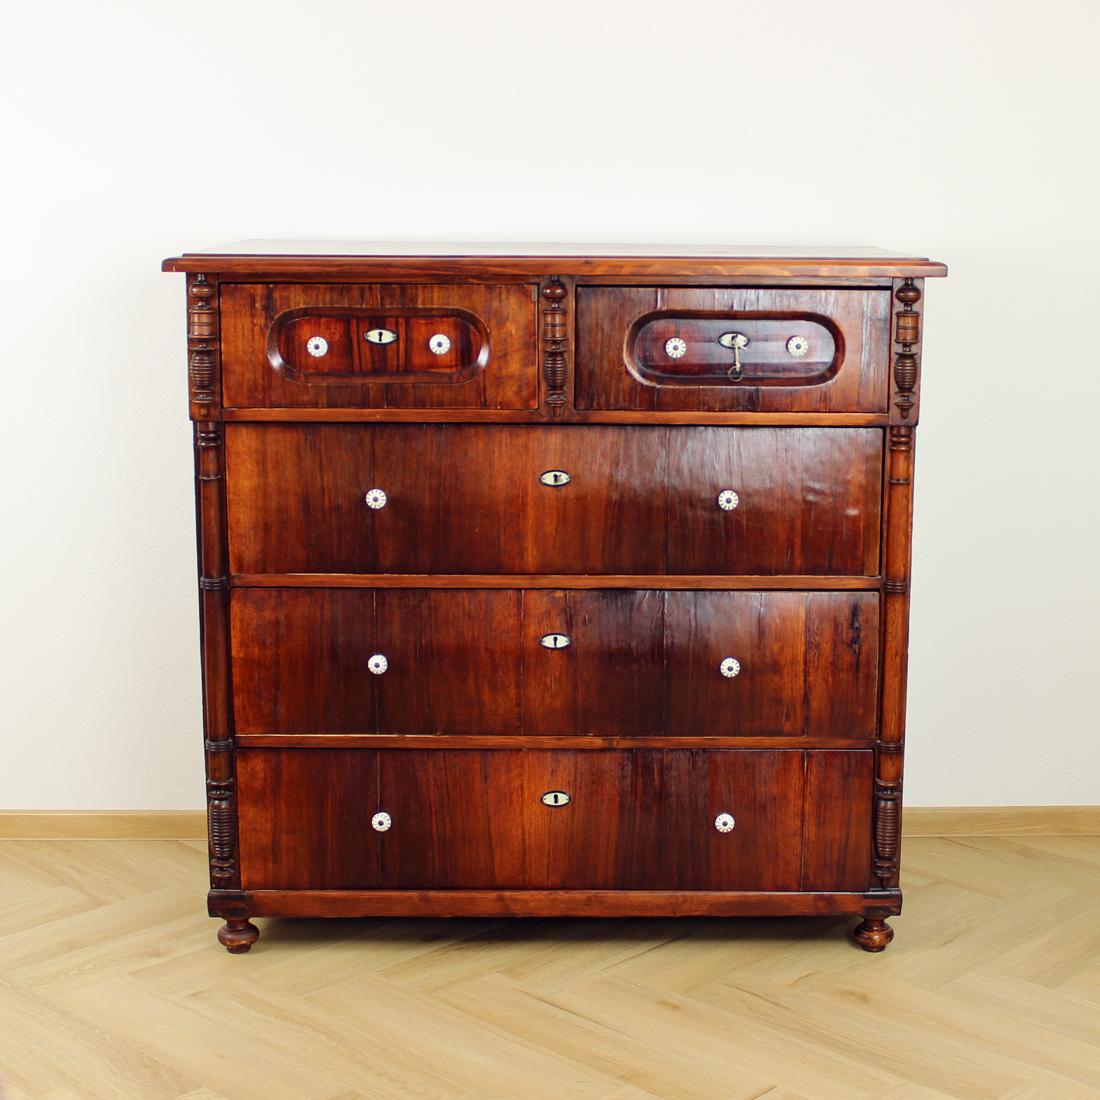 Unique chest of drawers in a beautiful condition. Produced in art deco period in Czechoslovakia. The chest has been fully restored into a beautiful original state. Produced out of a pure oak wood with beautiful details all over. The item has two